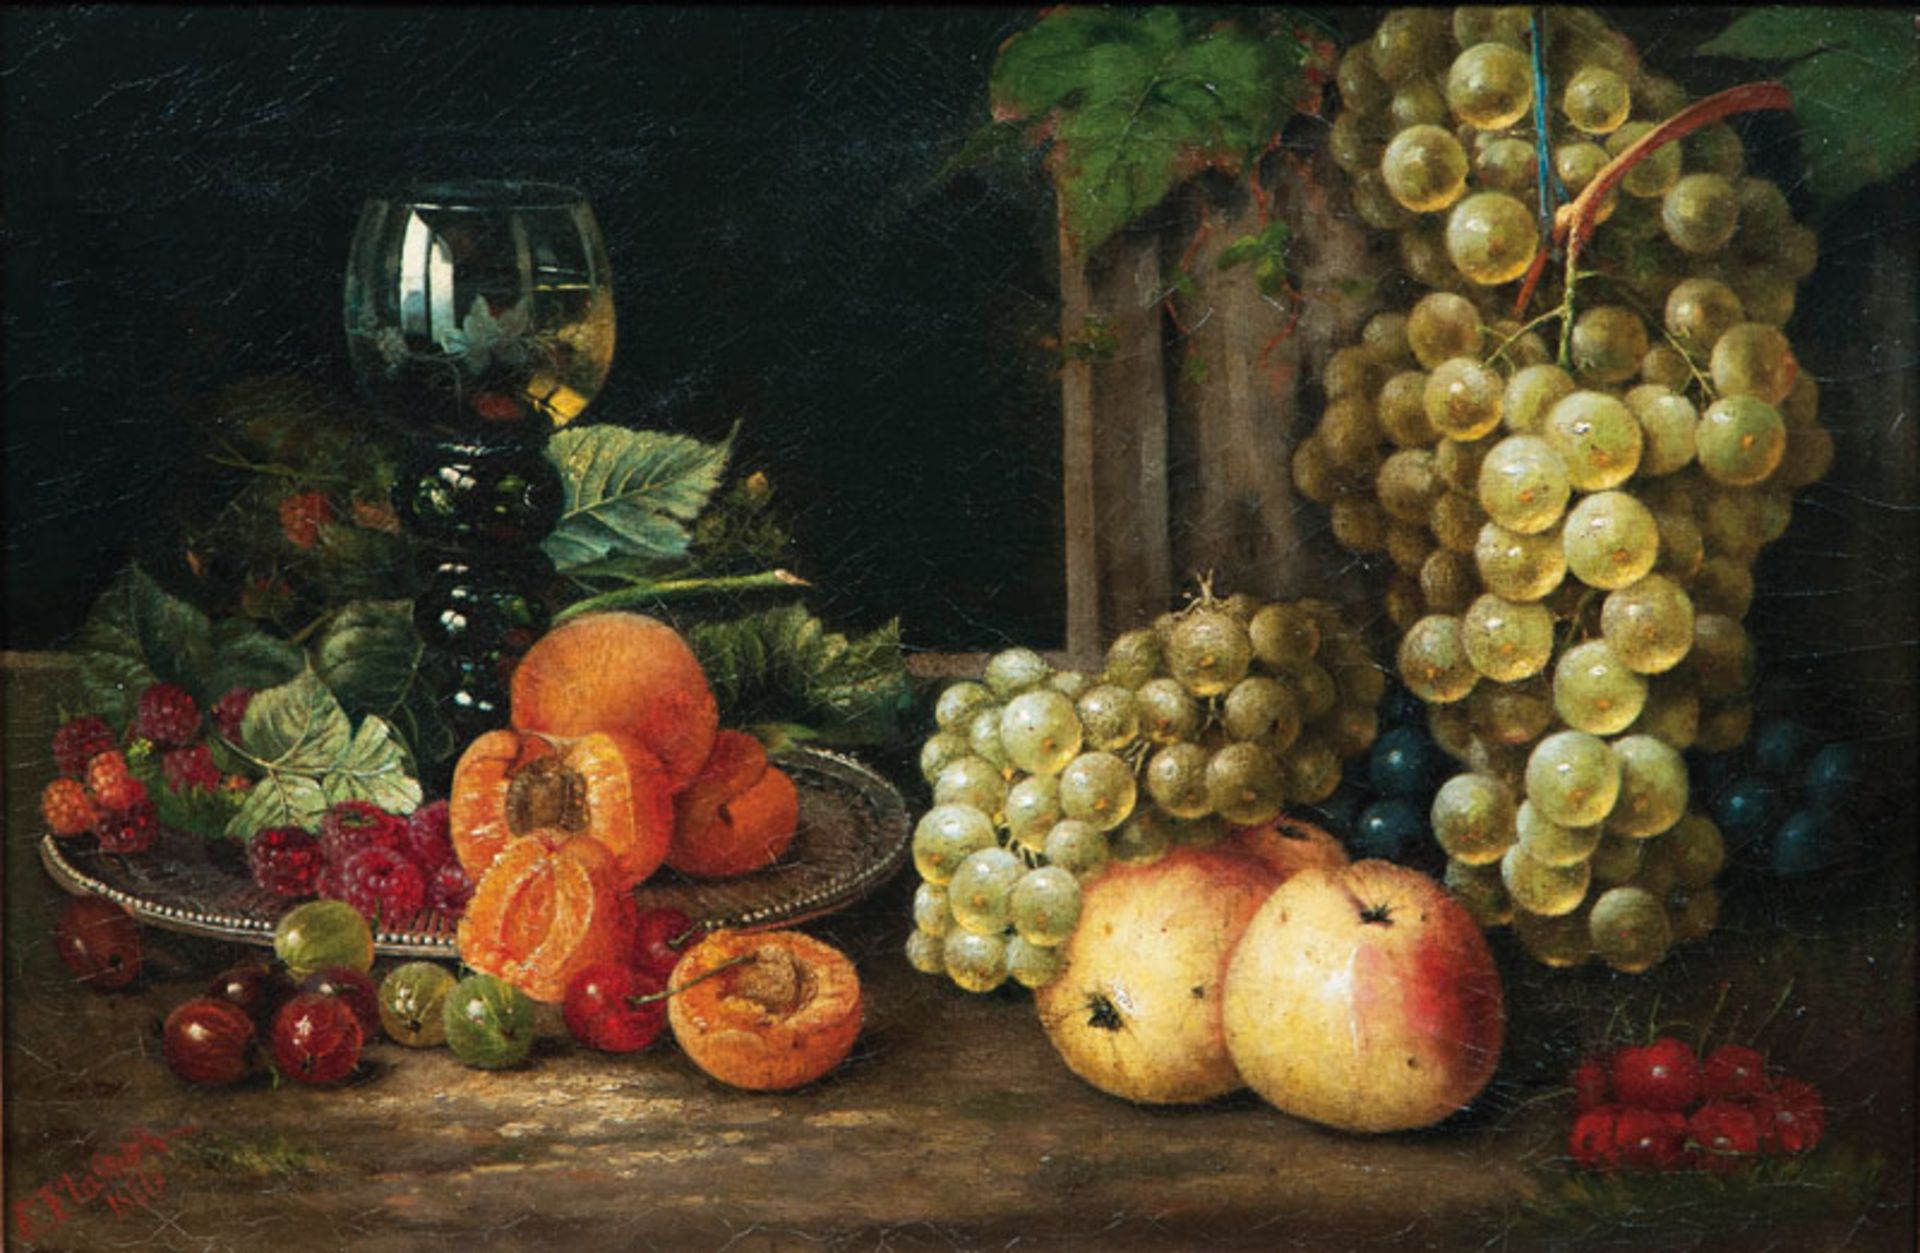 Flashoff (vor 1856 - nach 1886) Still Life with Fruits and Rummer Oil/canvas, 39 x 57,5 cm, lo.